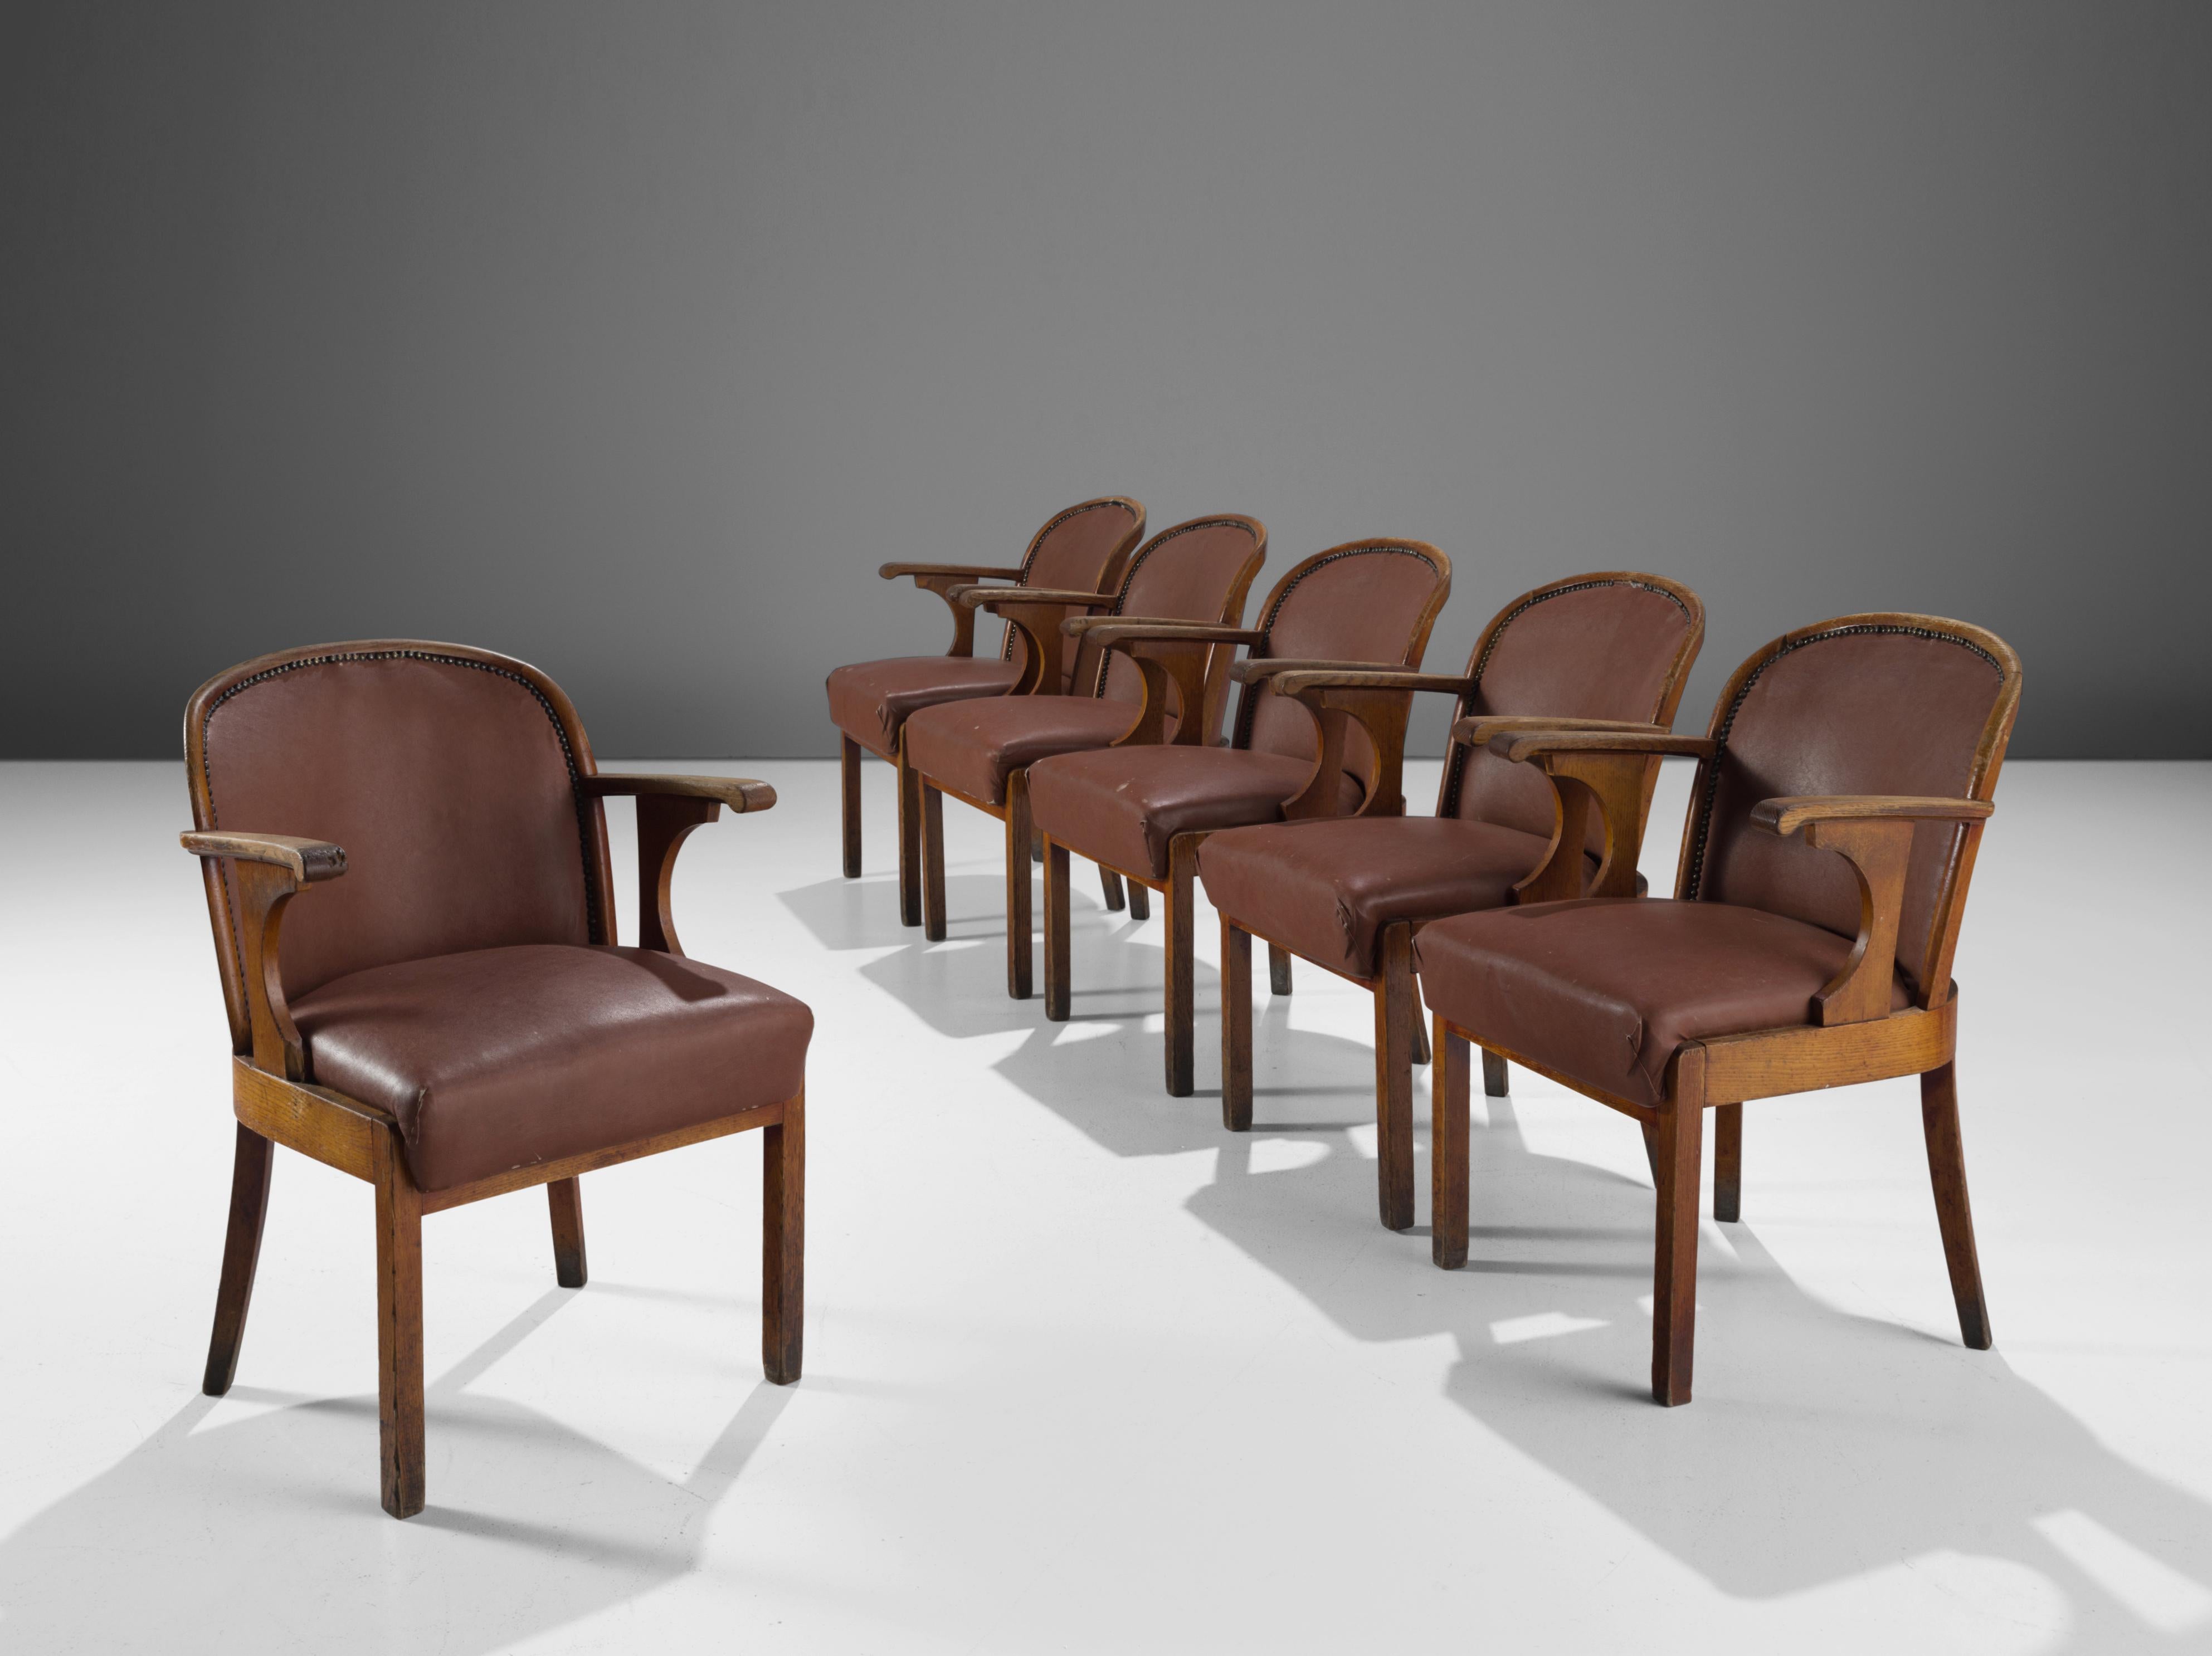 Set of six chairs, oak, brown faux leather, Sweden, 1940s

This set of six dining chairs with original leatherette upholstery is made by a Swedish cabinetmaker. The chairs have a solid oak frame with tapered legs. The central feature of this design